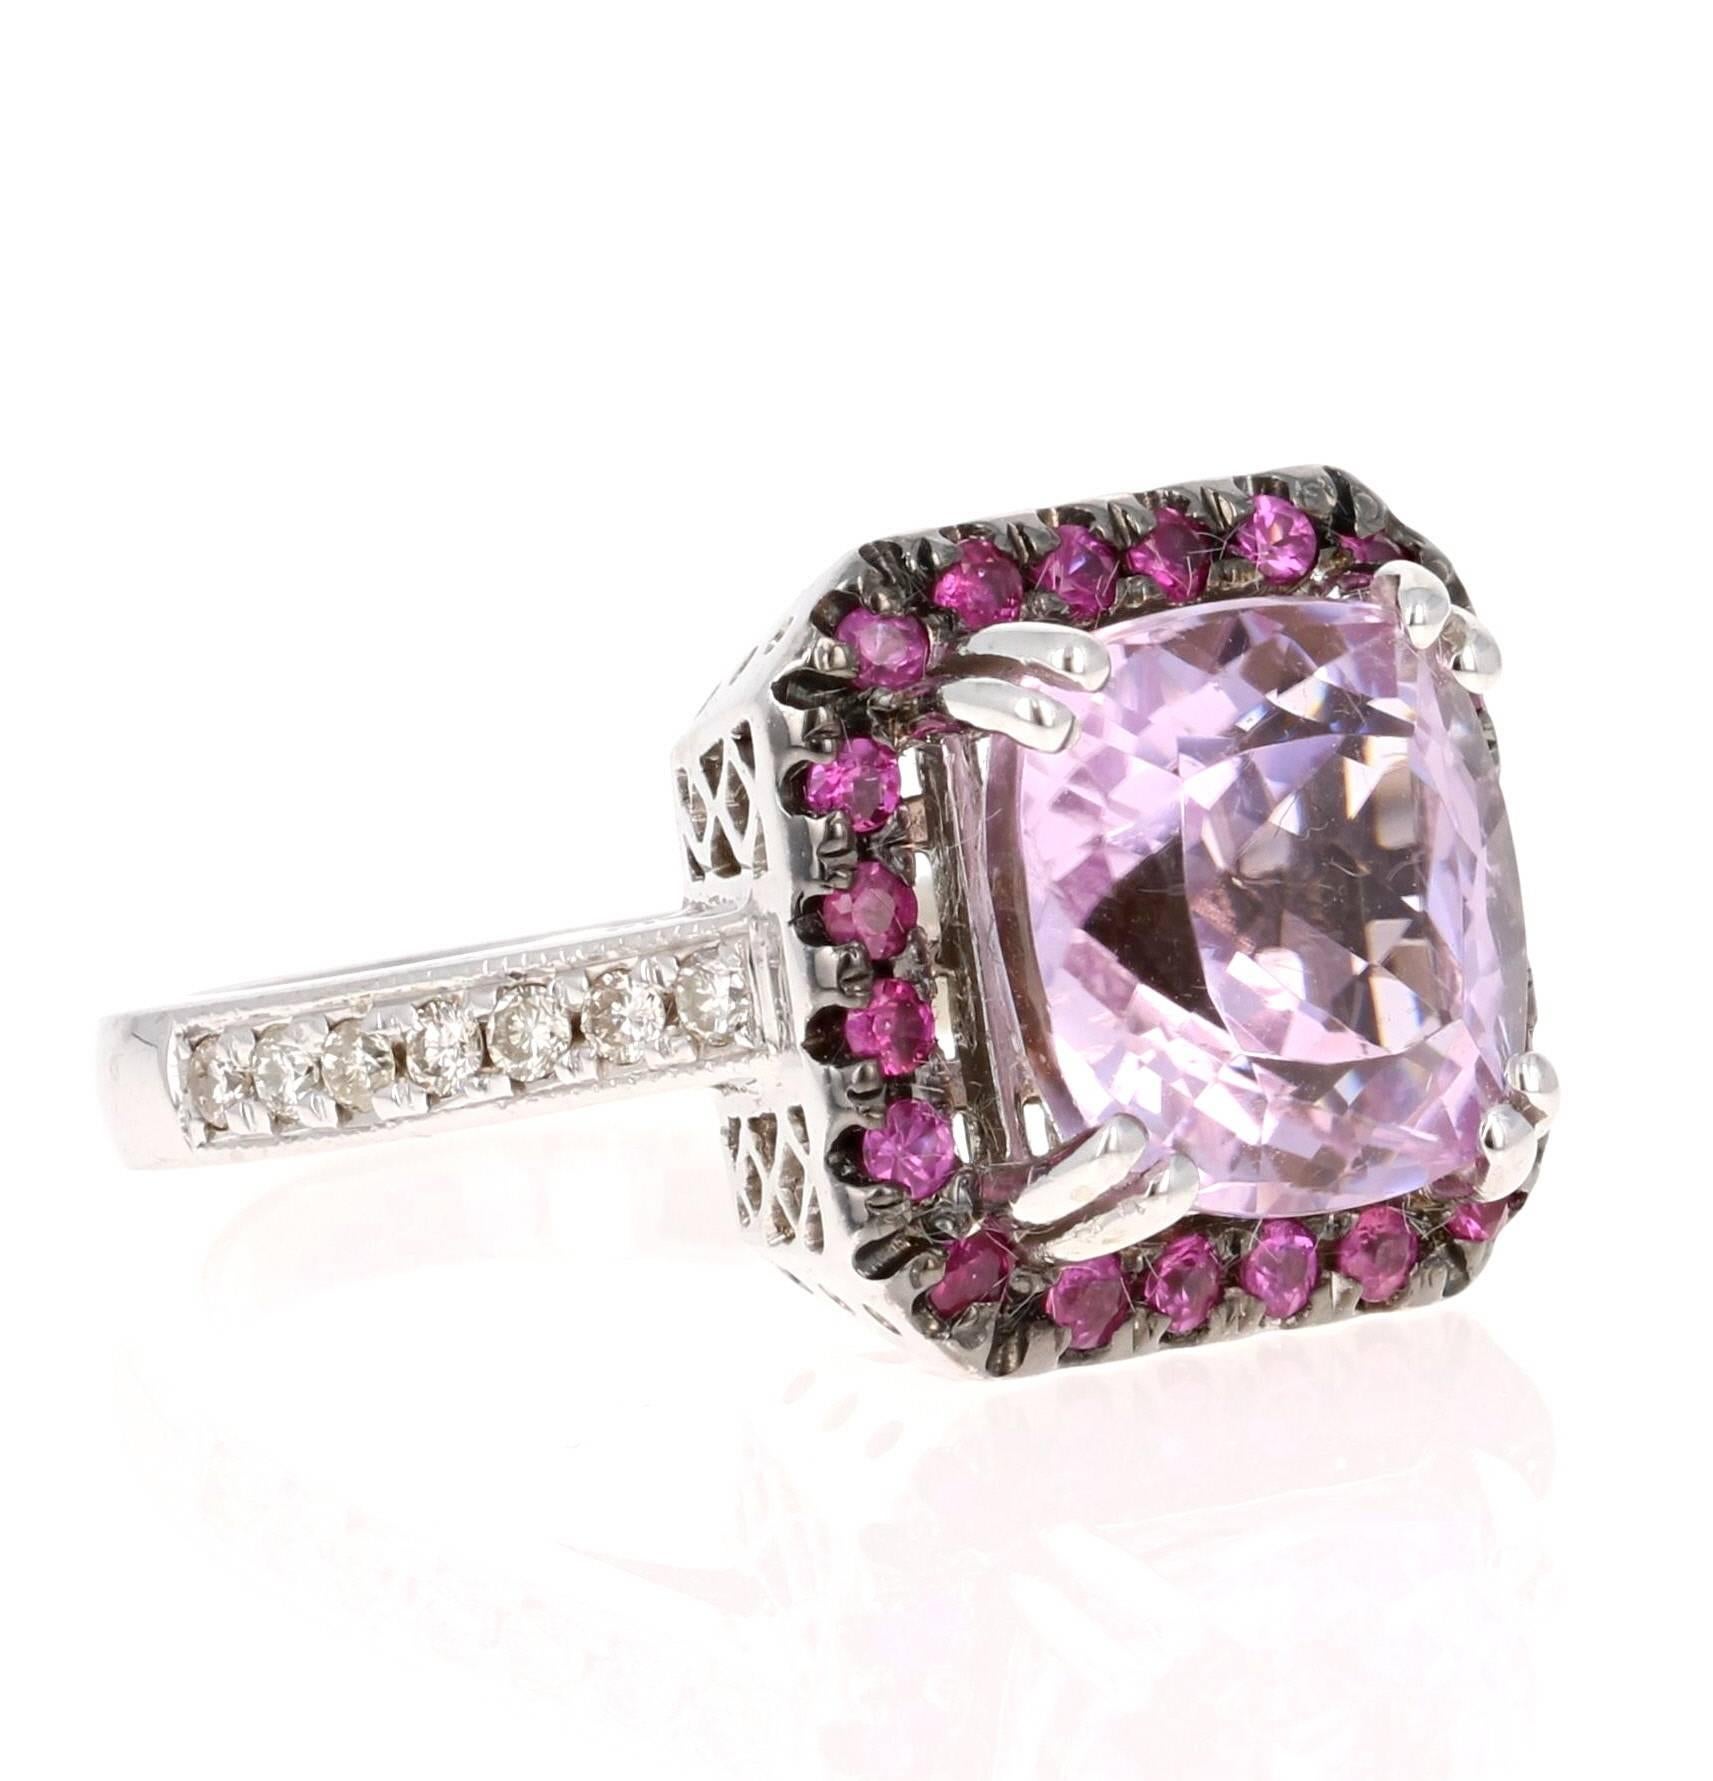 This beautiful ring has a lovely 5.31 carat Kunzite that is set in the center of the ring, it is surrounded by a unique halo of 20 Round Cut Pink Sapphires that weigh 0.37 carats.  This ring also has 15 Round Cut Diamonds that weigh 0.21 carat and